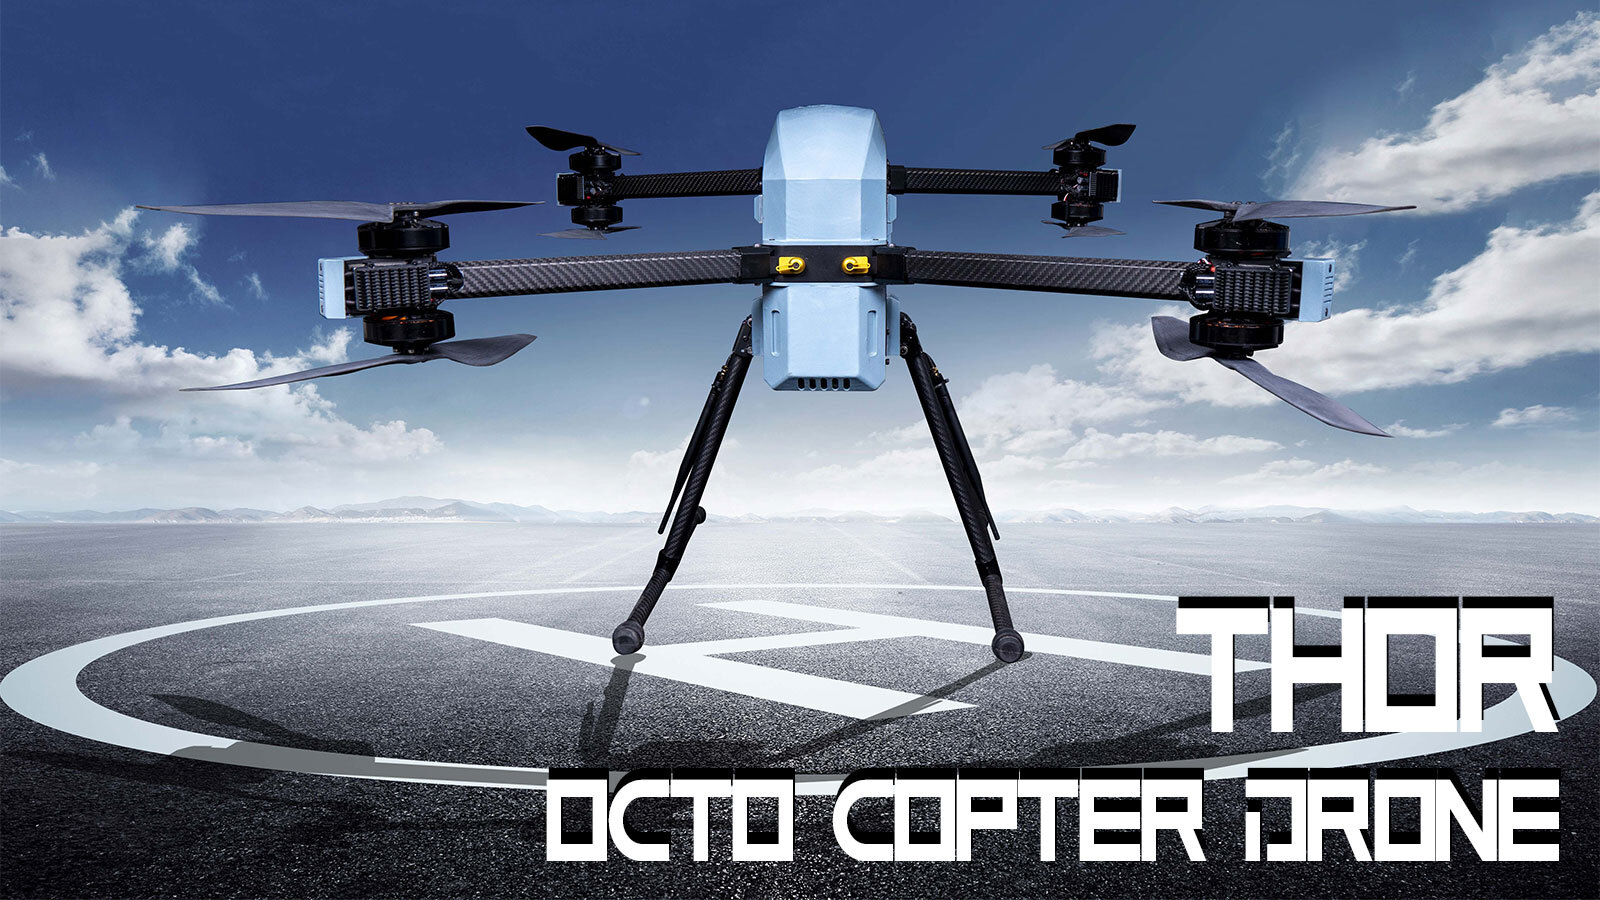 Thor 900 X8 Octo-Rotor drone  